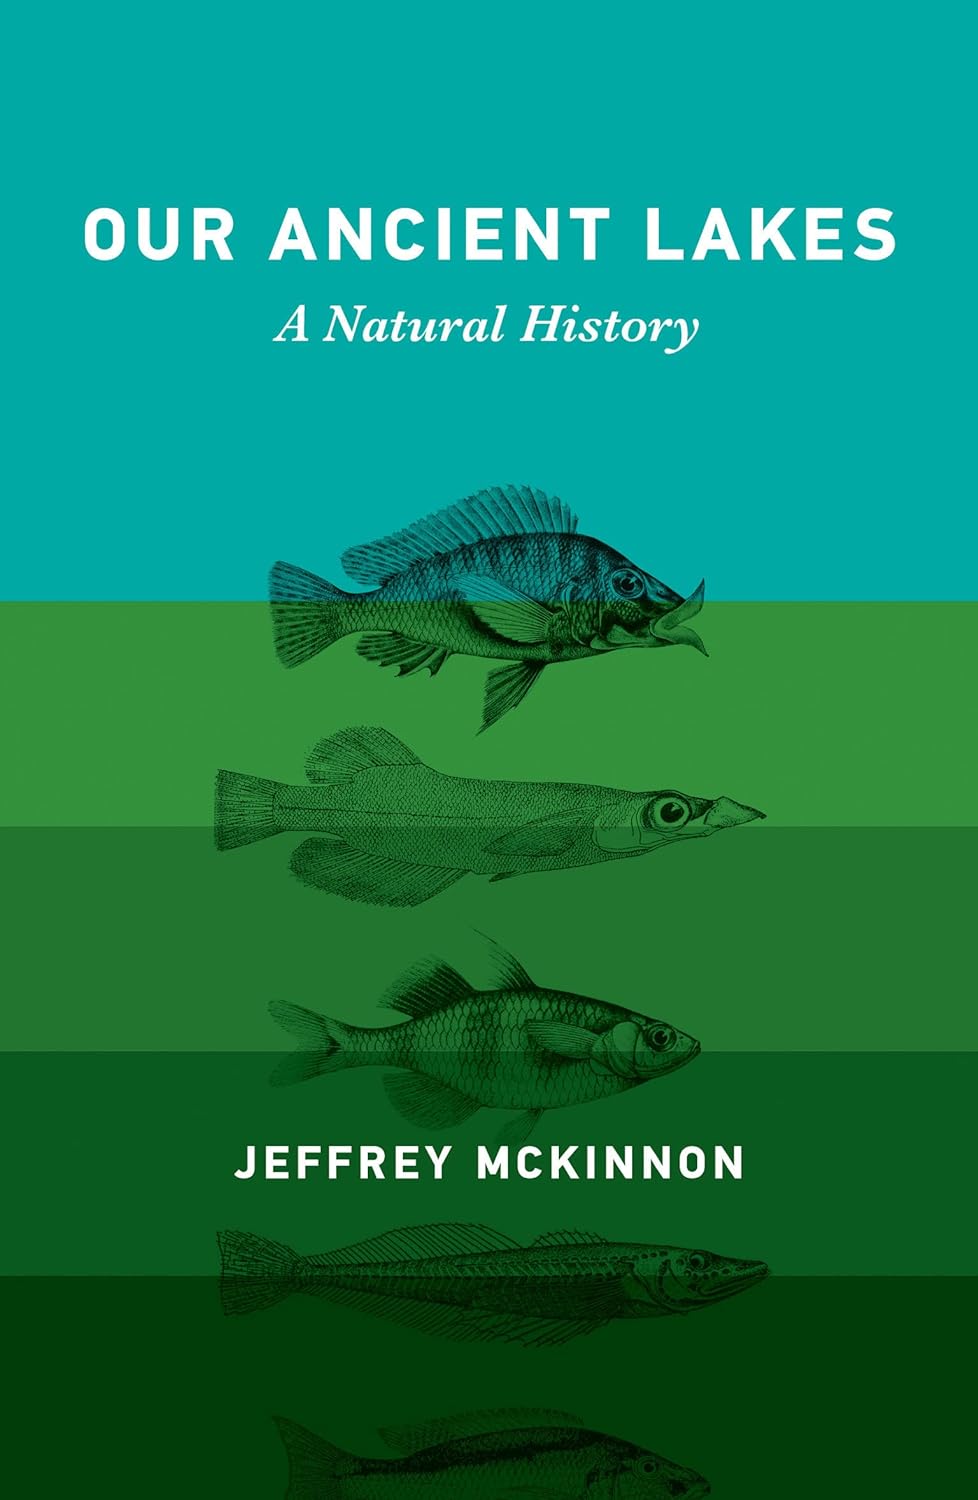 Our Ancient Lakes: A Natural History by Jeffrey Mckinnon